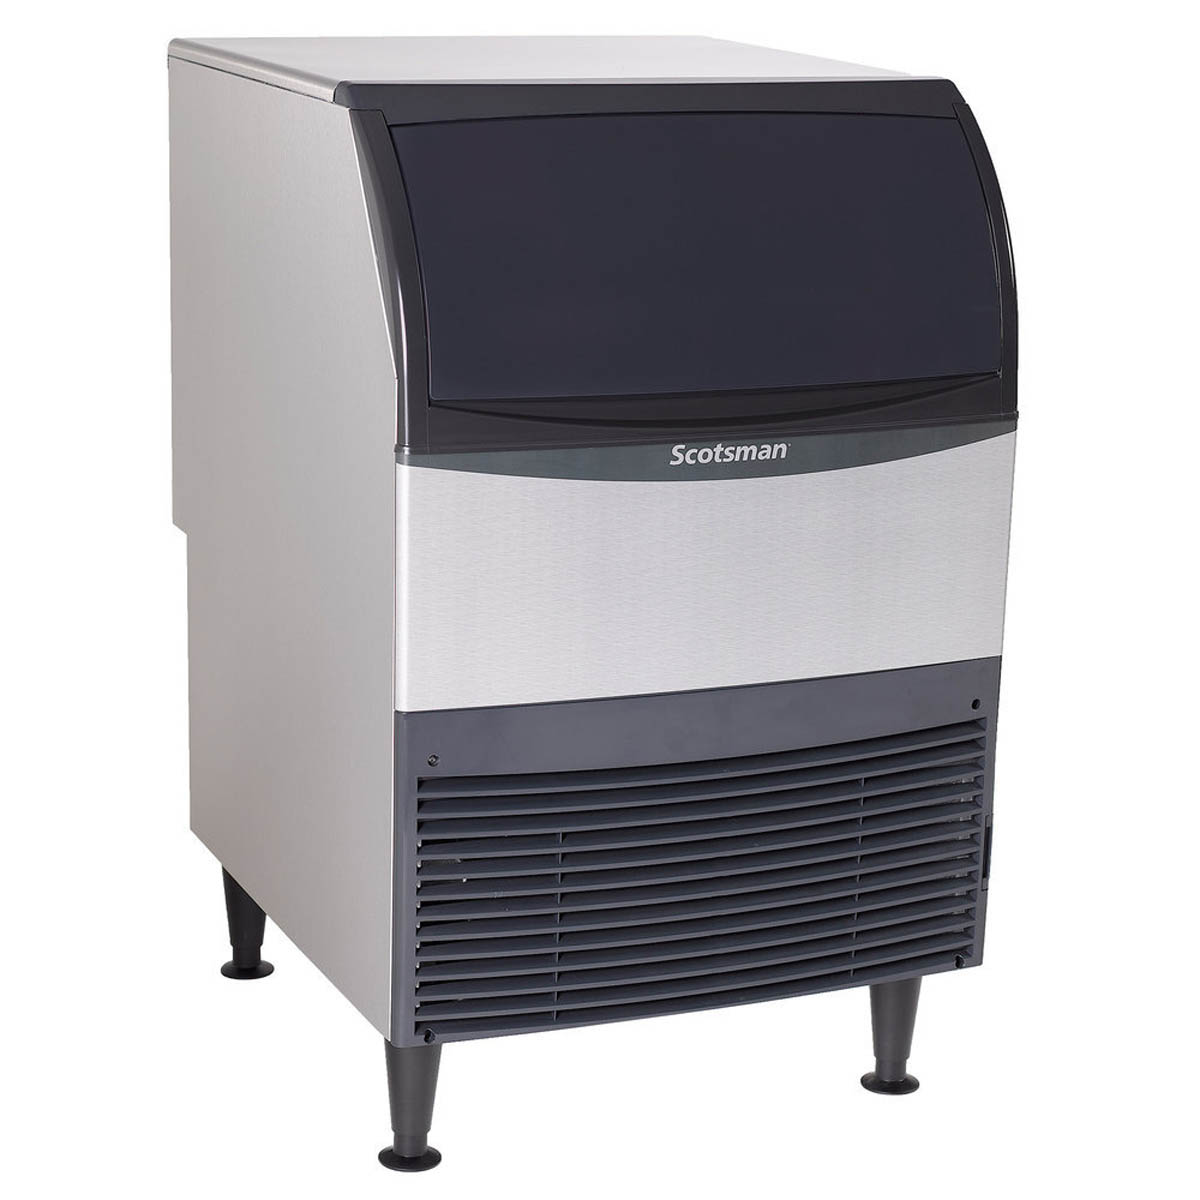 Scotsman UN324A-1 Provides Soft and Slow Melting For Your Service and Displays, Chef's Deal